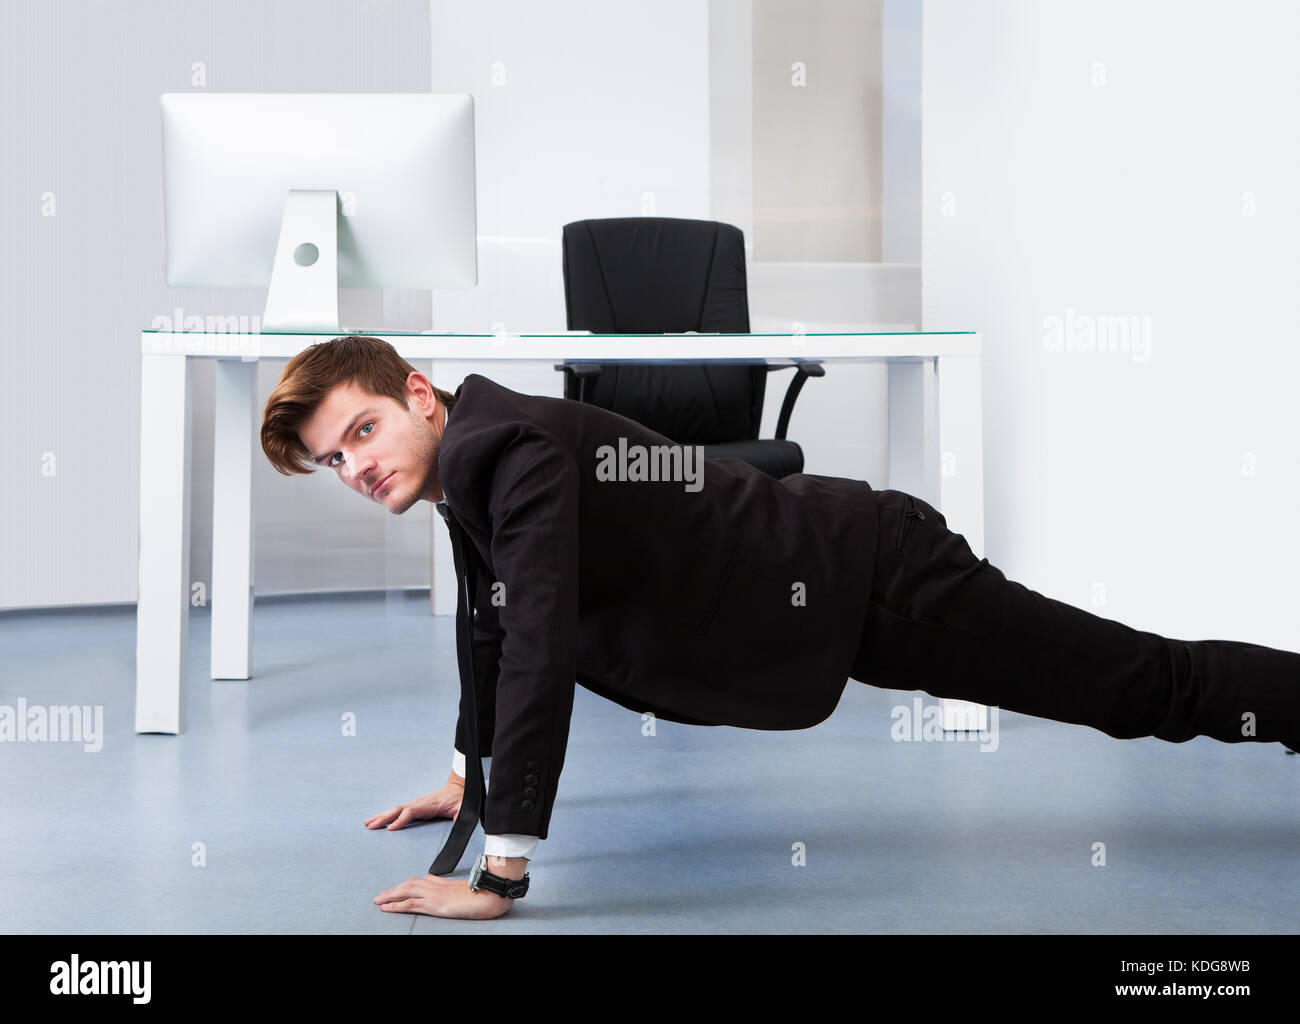 Young Businessman Doing Pushups At His Workplace Stock Photo